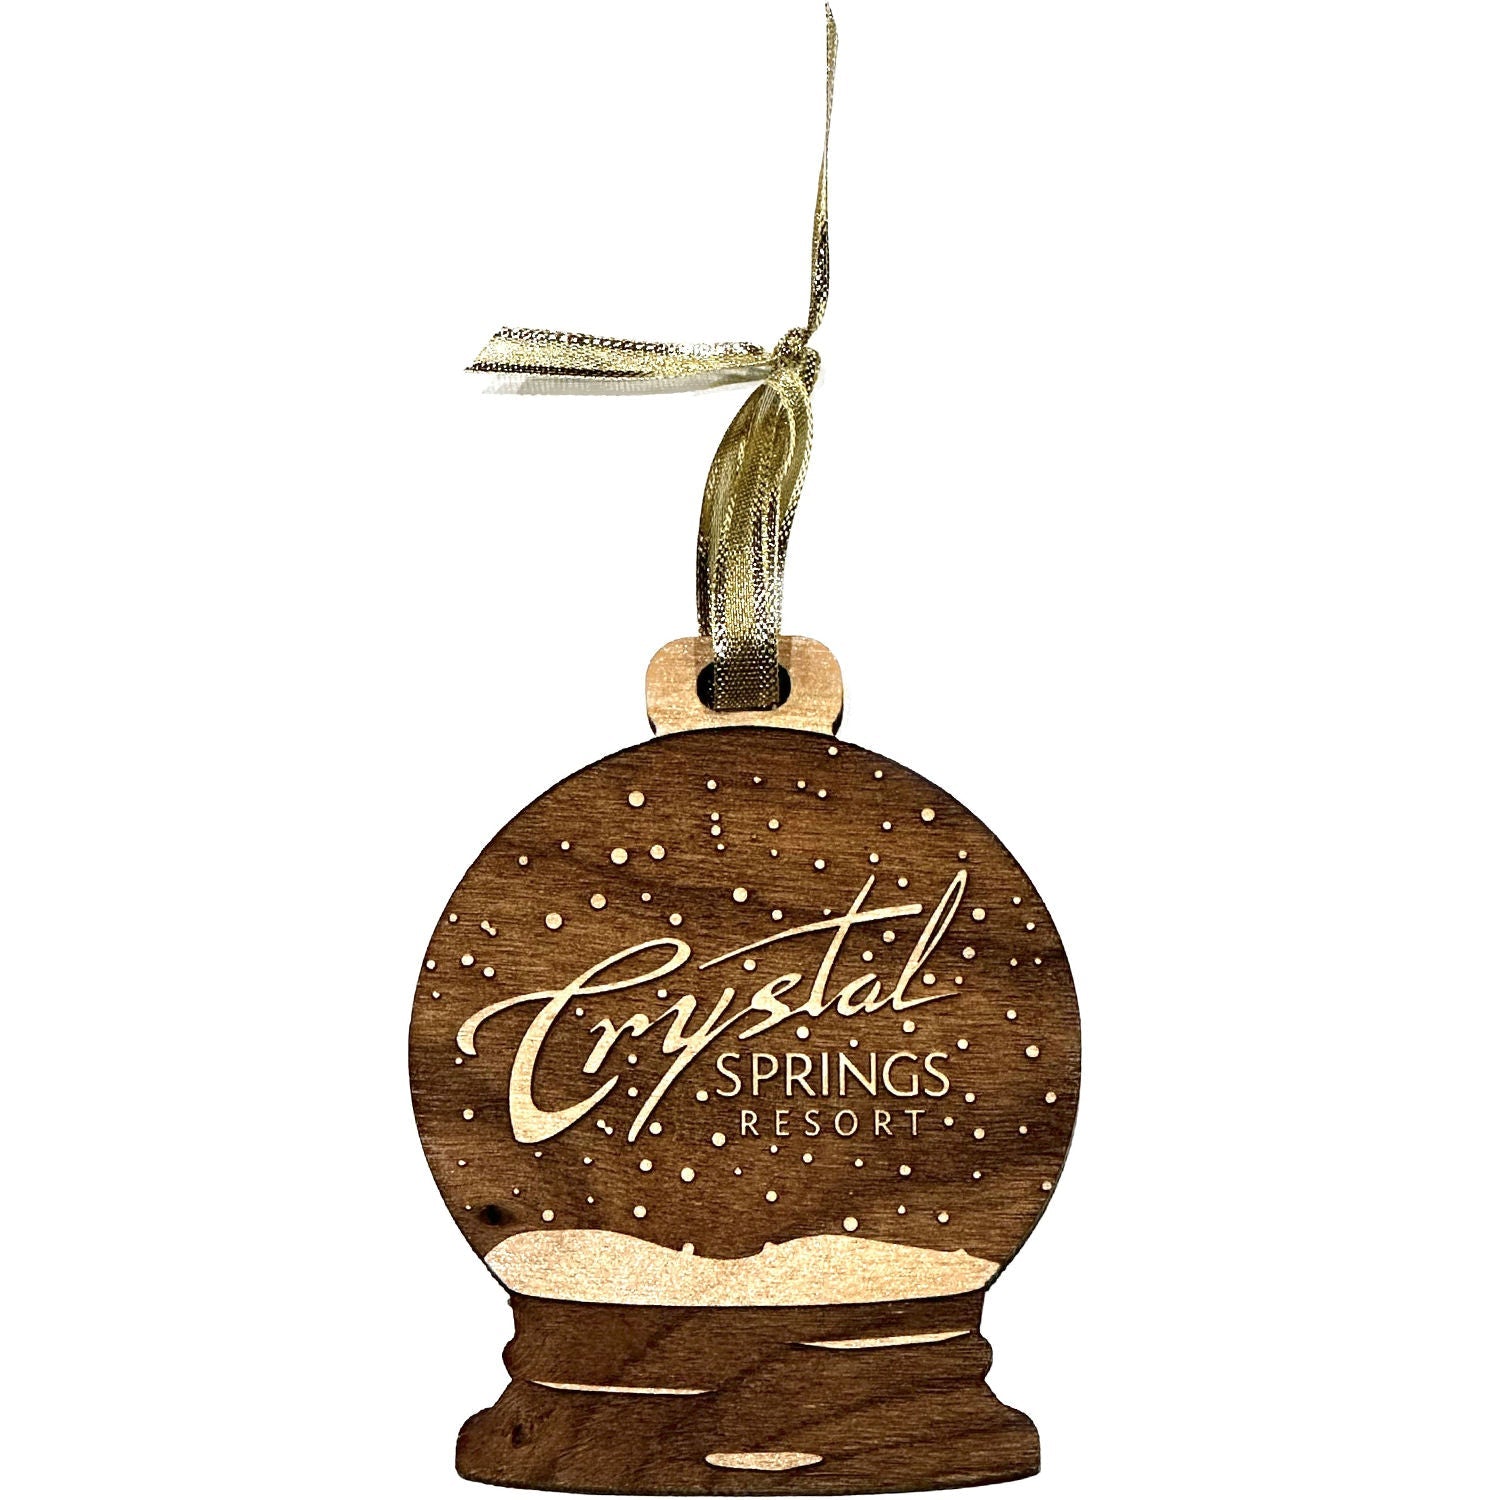 Crystal Springs Wooden Ornament: Snow Globe